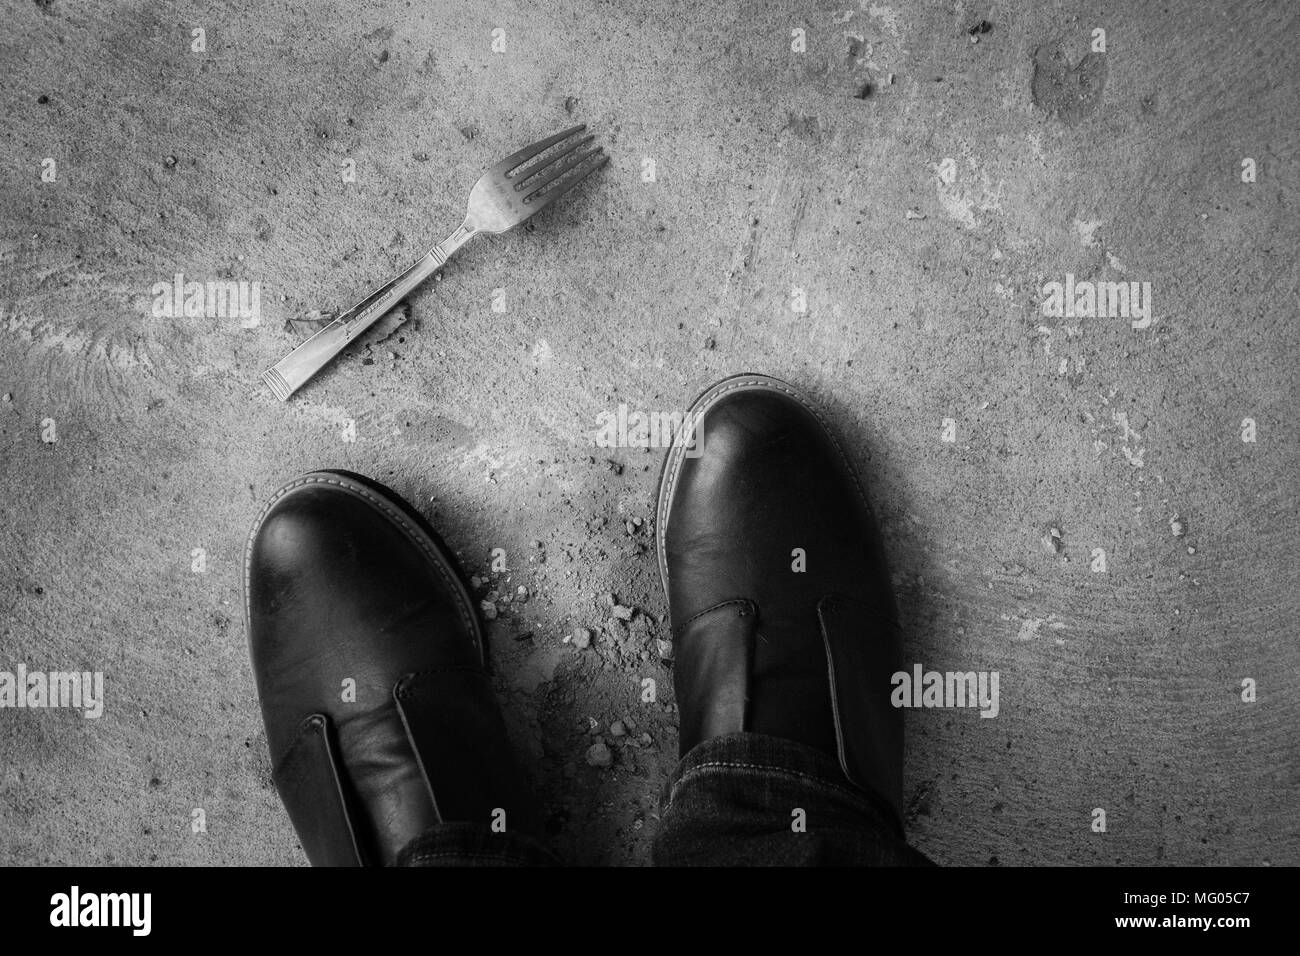 A black and white image of a fork lying on the ground near a person's feet Stock Photo